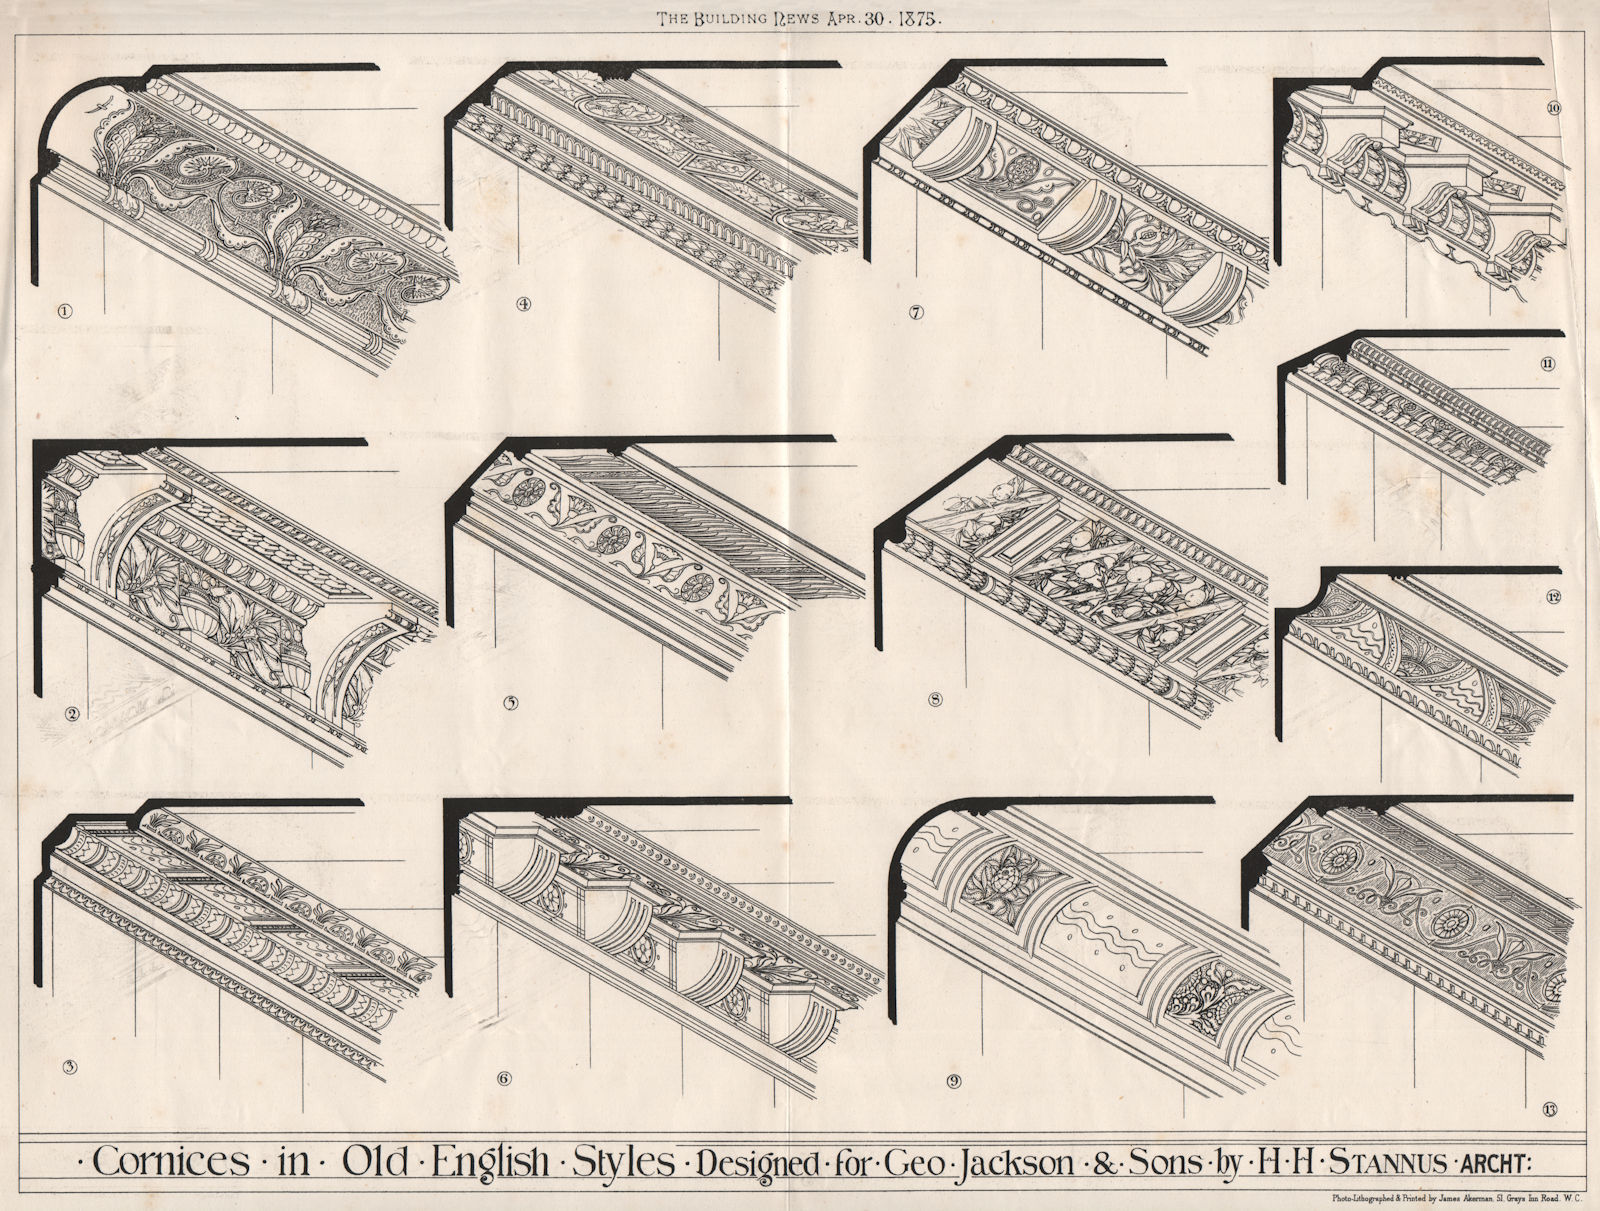 Associate Product Cornices in old English styles; for Geo. Jackson & Sons; H.H. Stannus Archt 1875